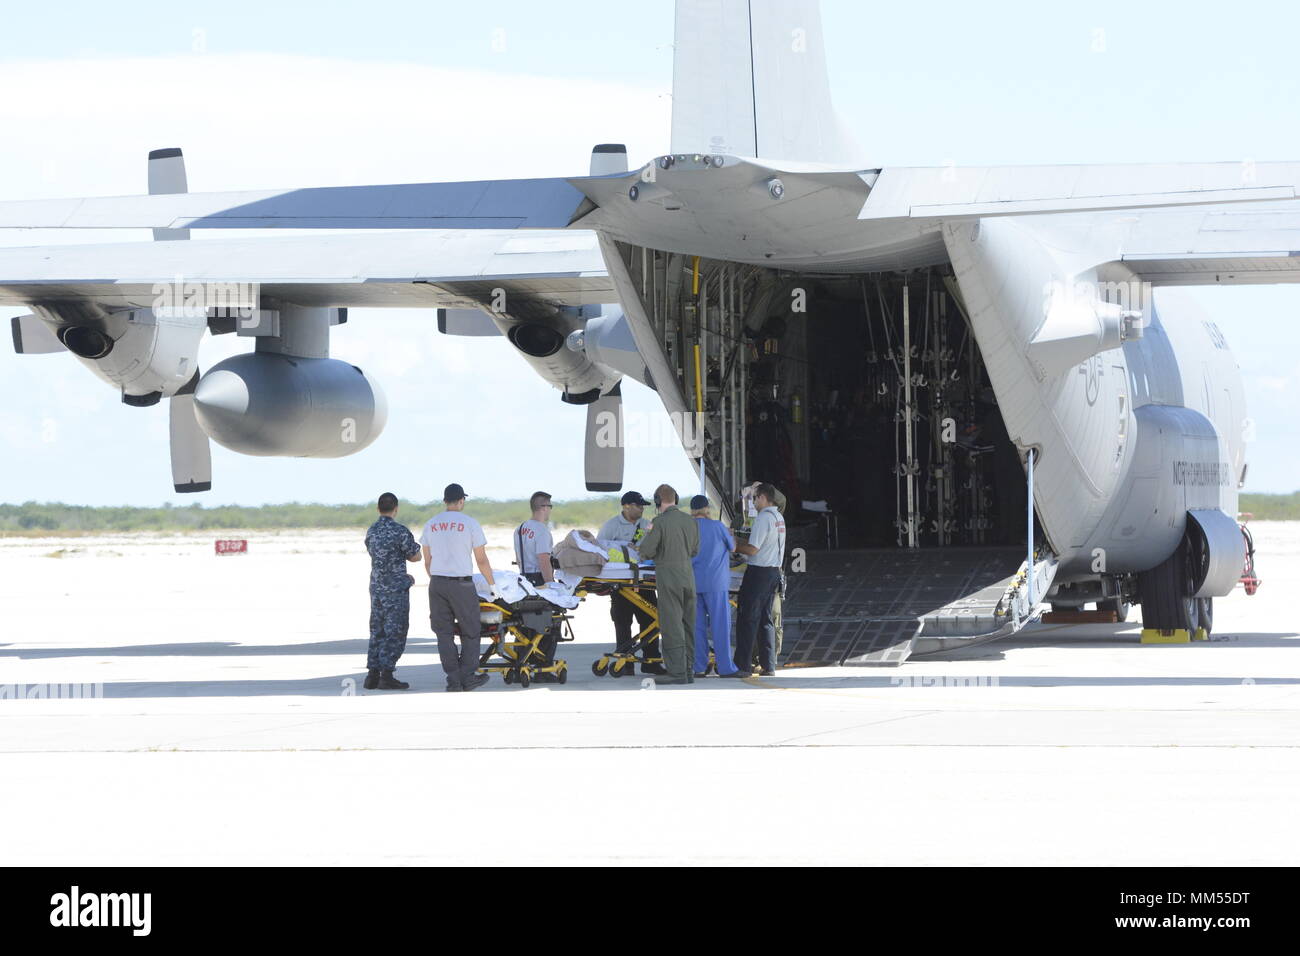 A patient from the Lower Keys Medical Center in Florida is loaded onto a North Carolina Air National Guard C-130 that arrived to assist with evacuation efforts prior to the arrival of Hurricane Irma, while at the Key West Naval Air Station, Key West Florida, Sept. 6, 2017. The patients were evacuated prior to the arrival of Hurricane Irma, a category five storm that is expected to cause catastrophic damage to the regions it makes landfall. The 156th Aeromedical Evacuation Squadron of the North Carolina Air National Guard provides medical care for wounded individuals while transporting them to  Stock Photo